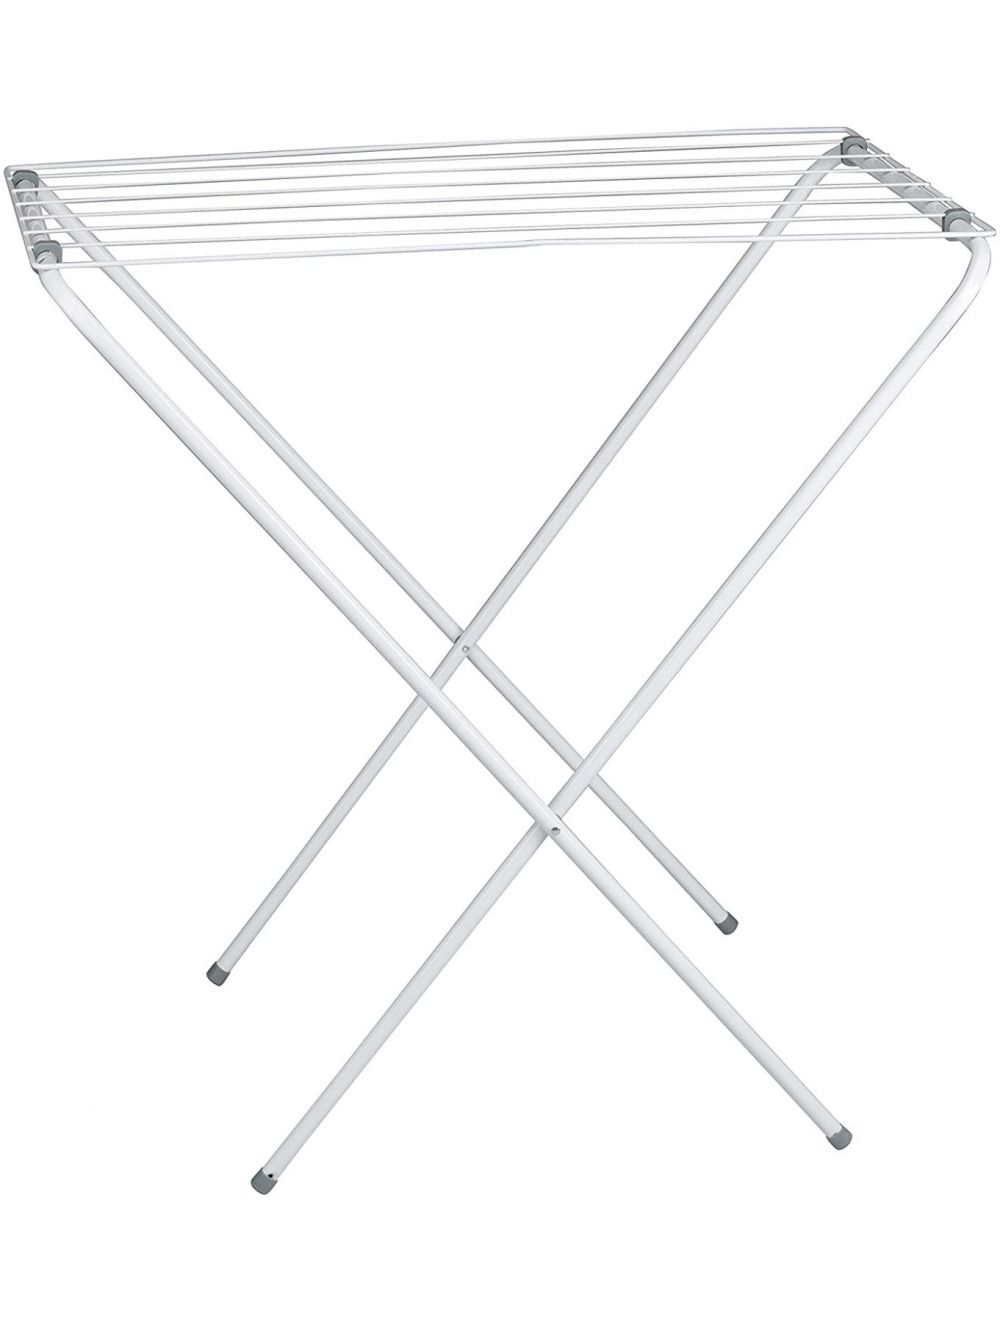 Royalford Lightweight Clothes Dryer, Silver, Stainless Steel
